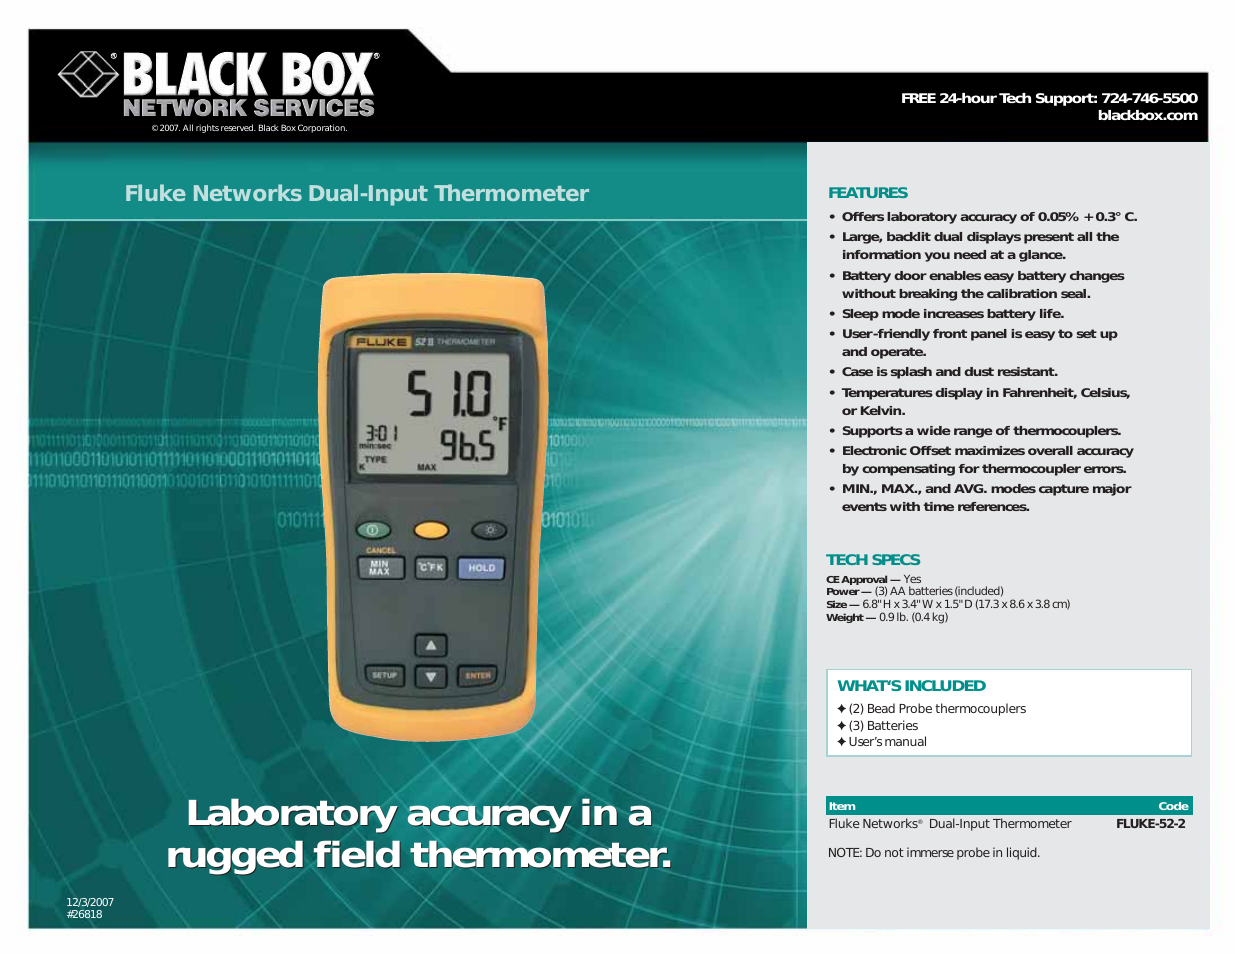 Dual-Input Thermometer